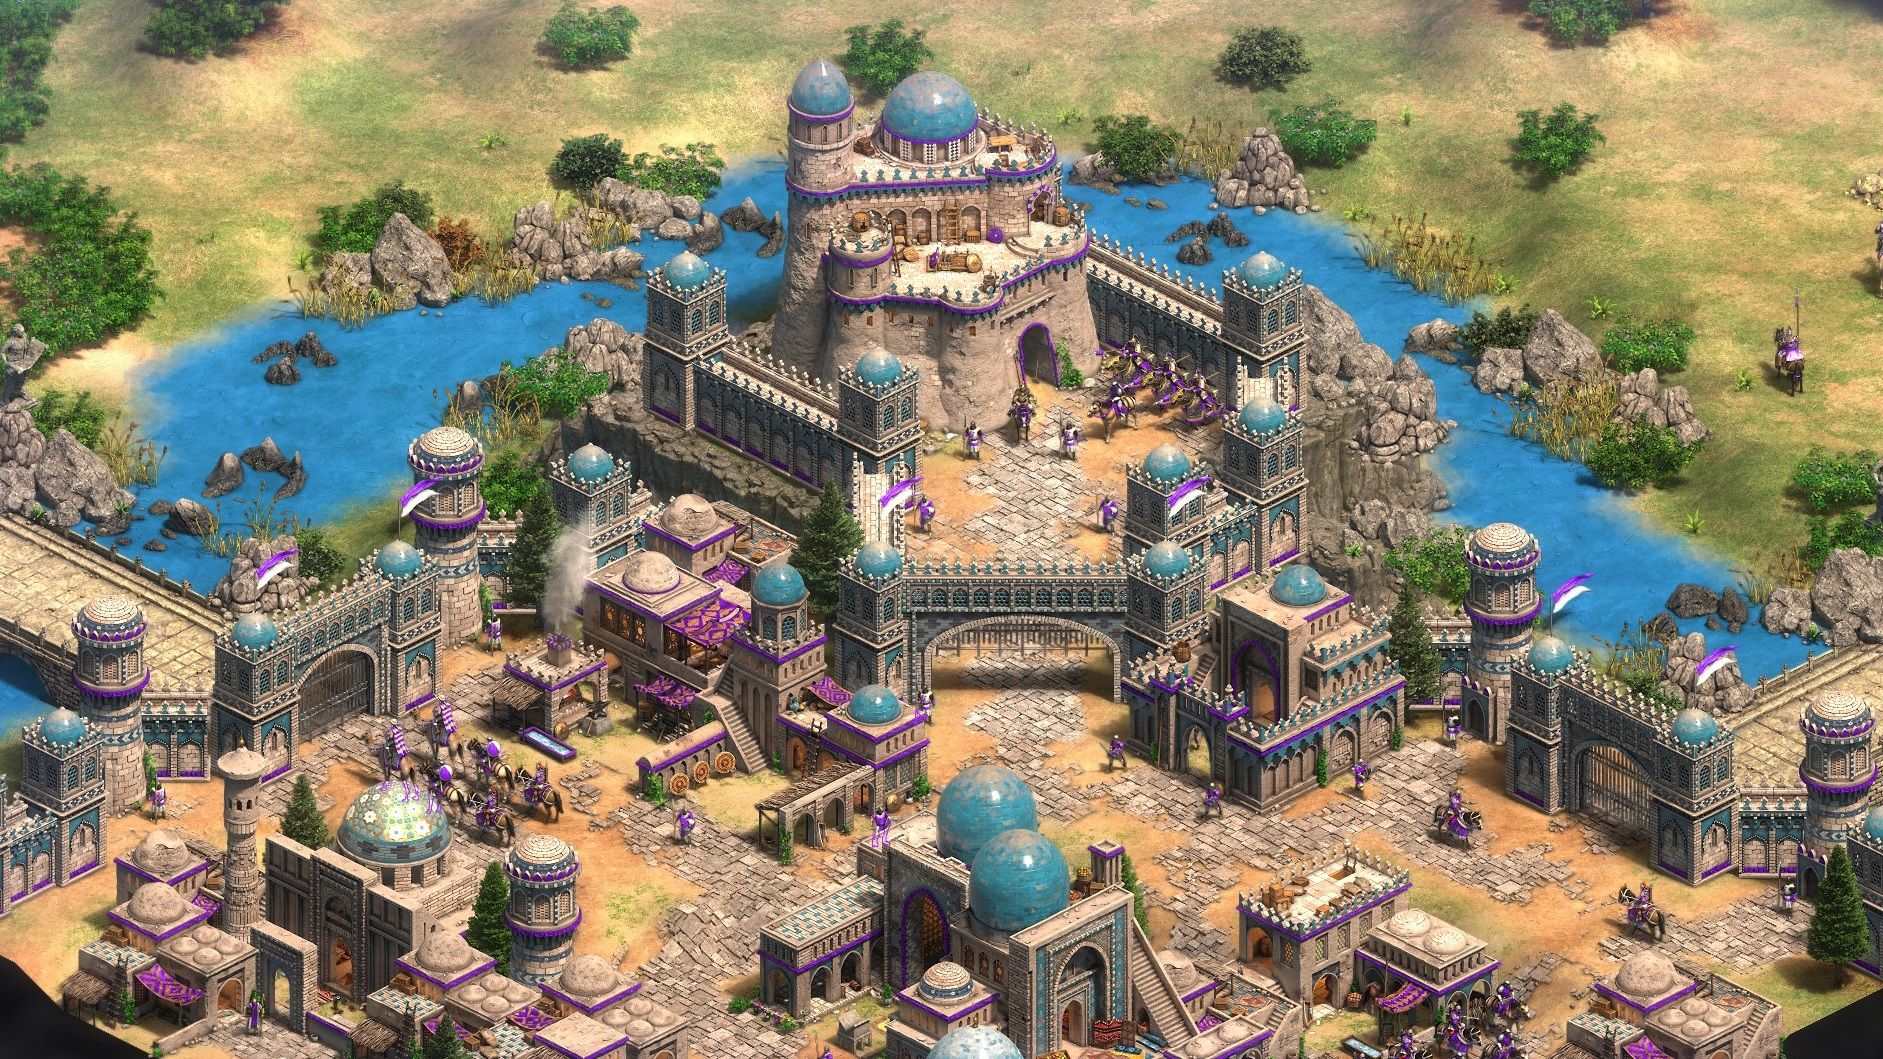 age of empires 2 hd free